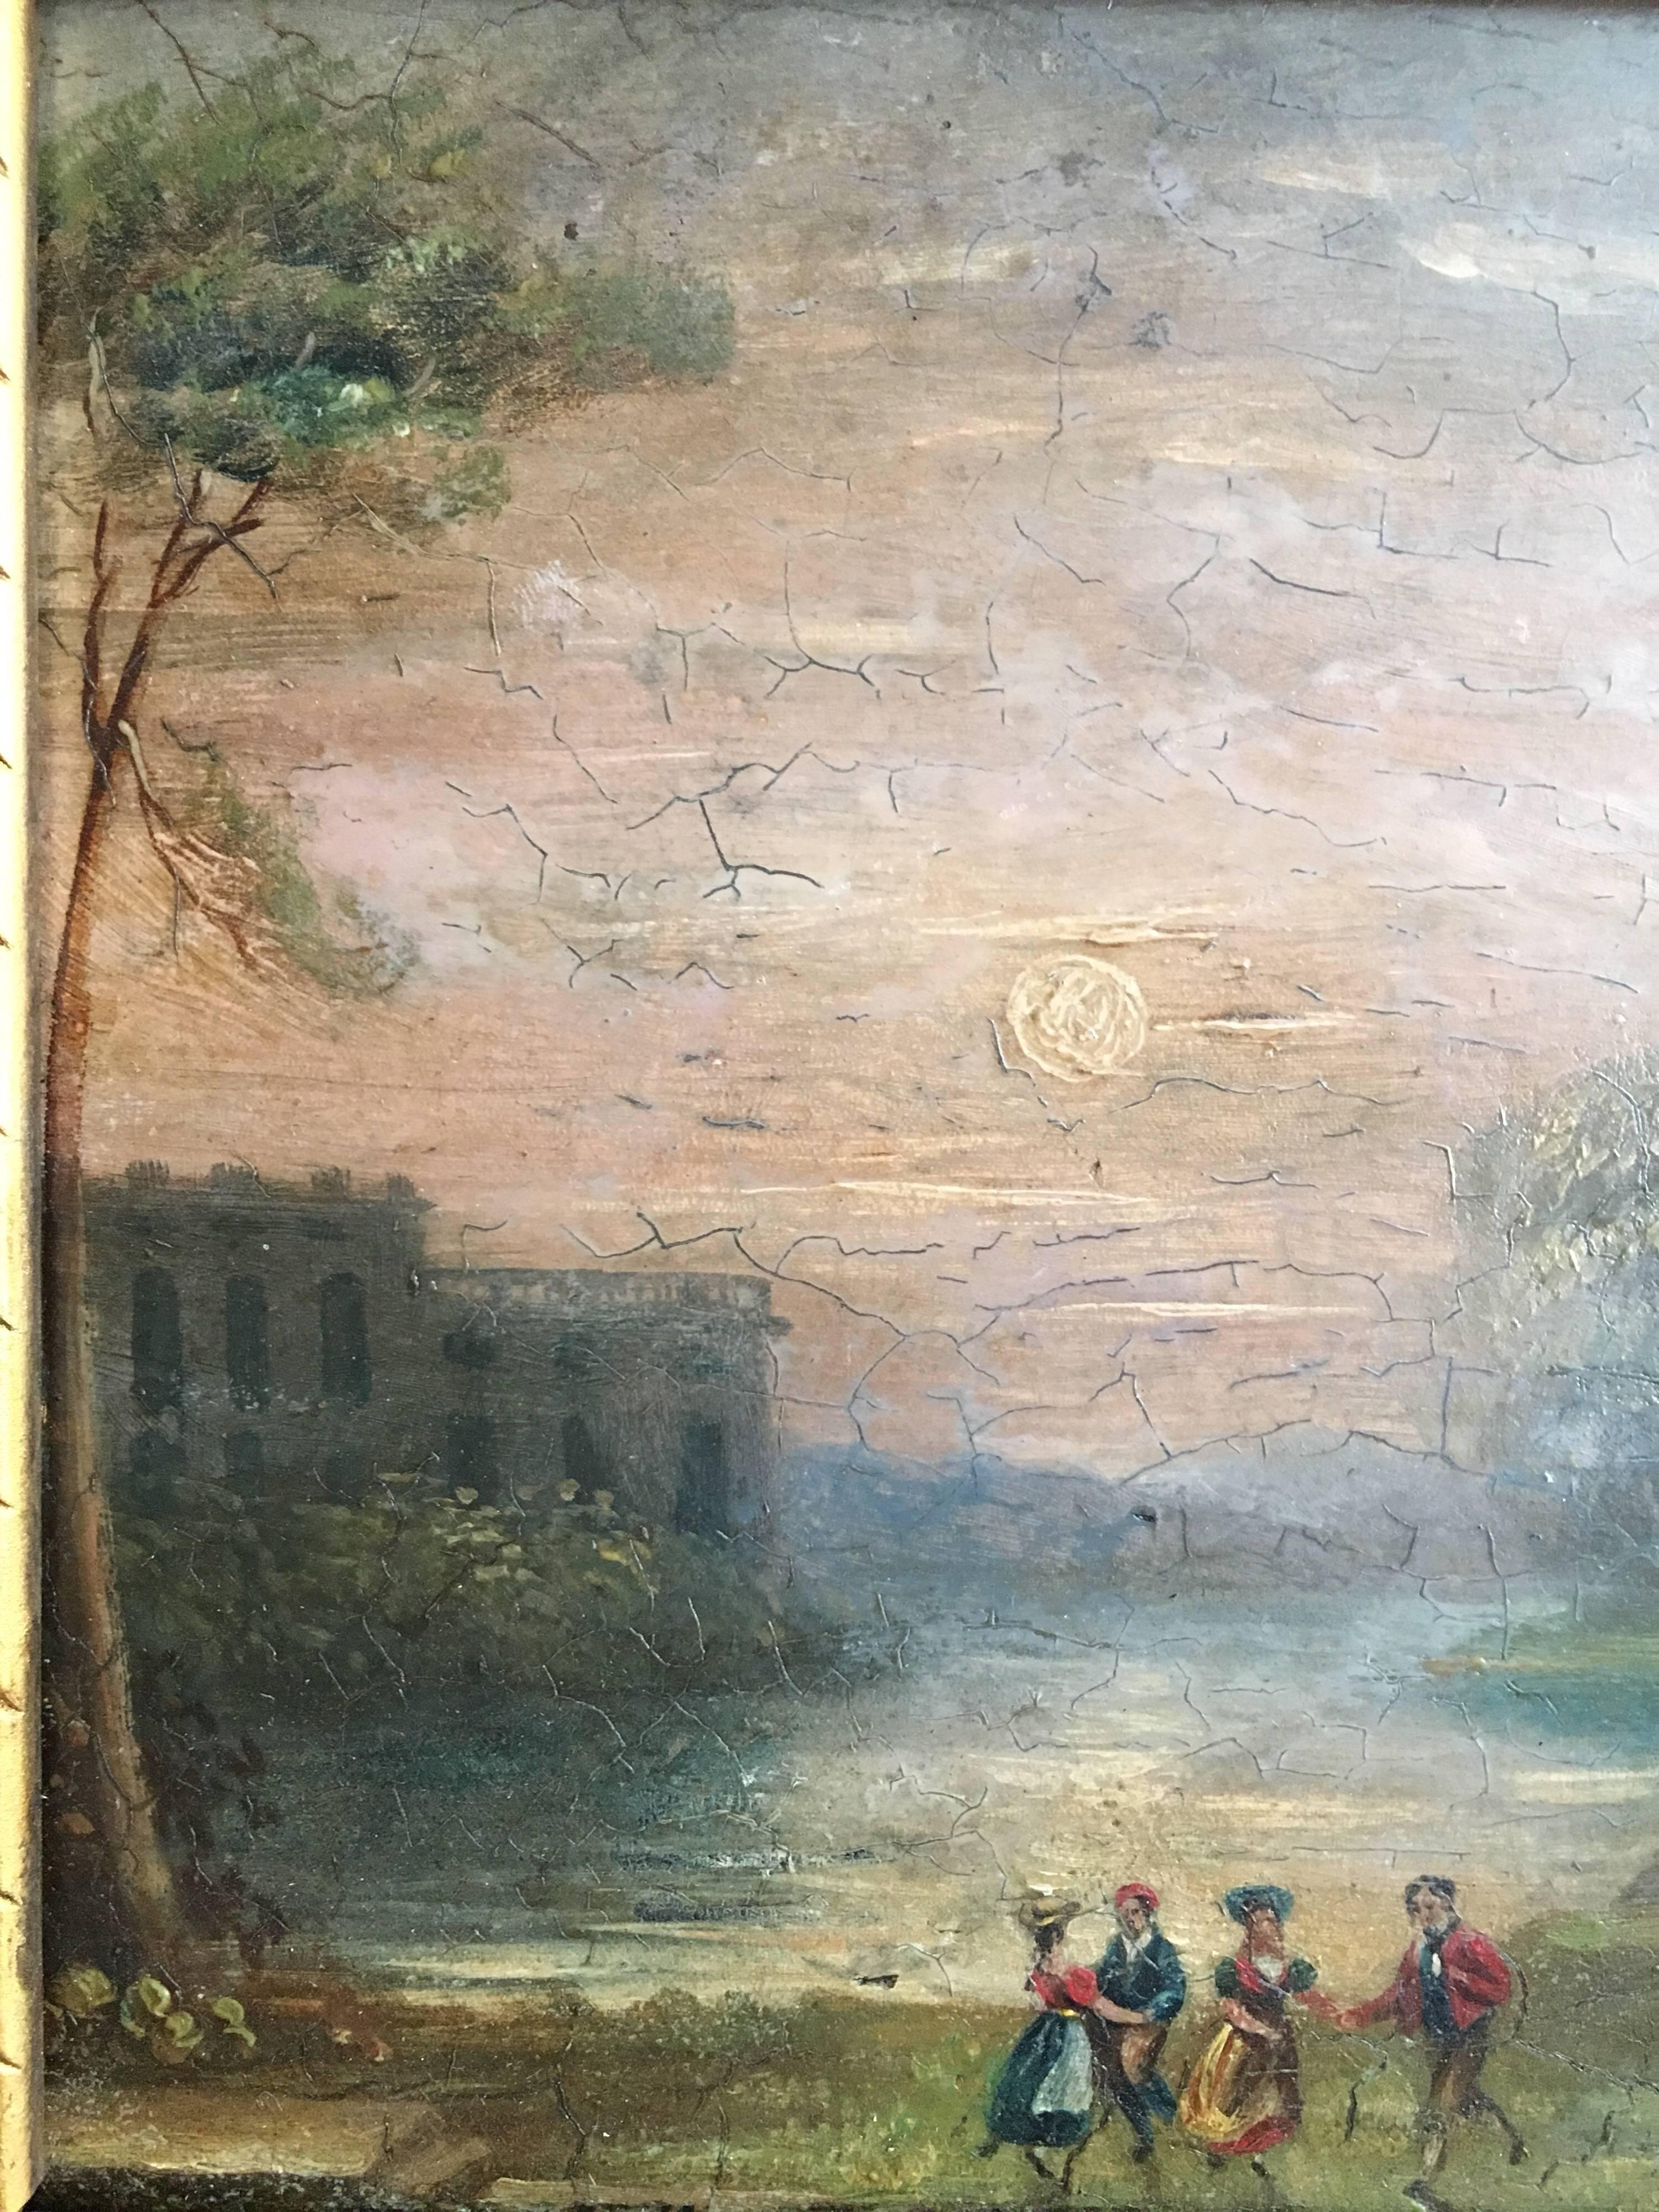 Evening Play
Italian School, mid 19th Century
Oil painting on board, framed
Framed size: 11.5 x 13 inches

Lovely antique oil painting of some children playing in the evening within the impressive grounds of ancient classical Roman ruins.

The low